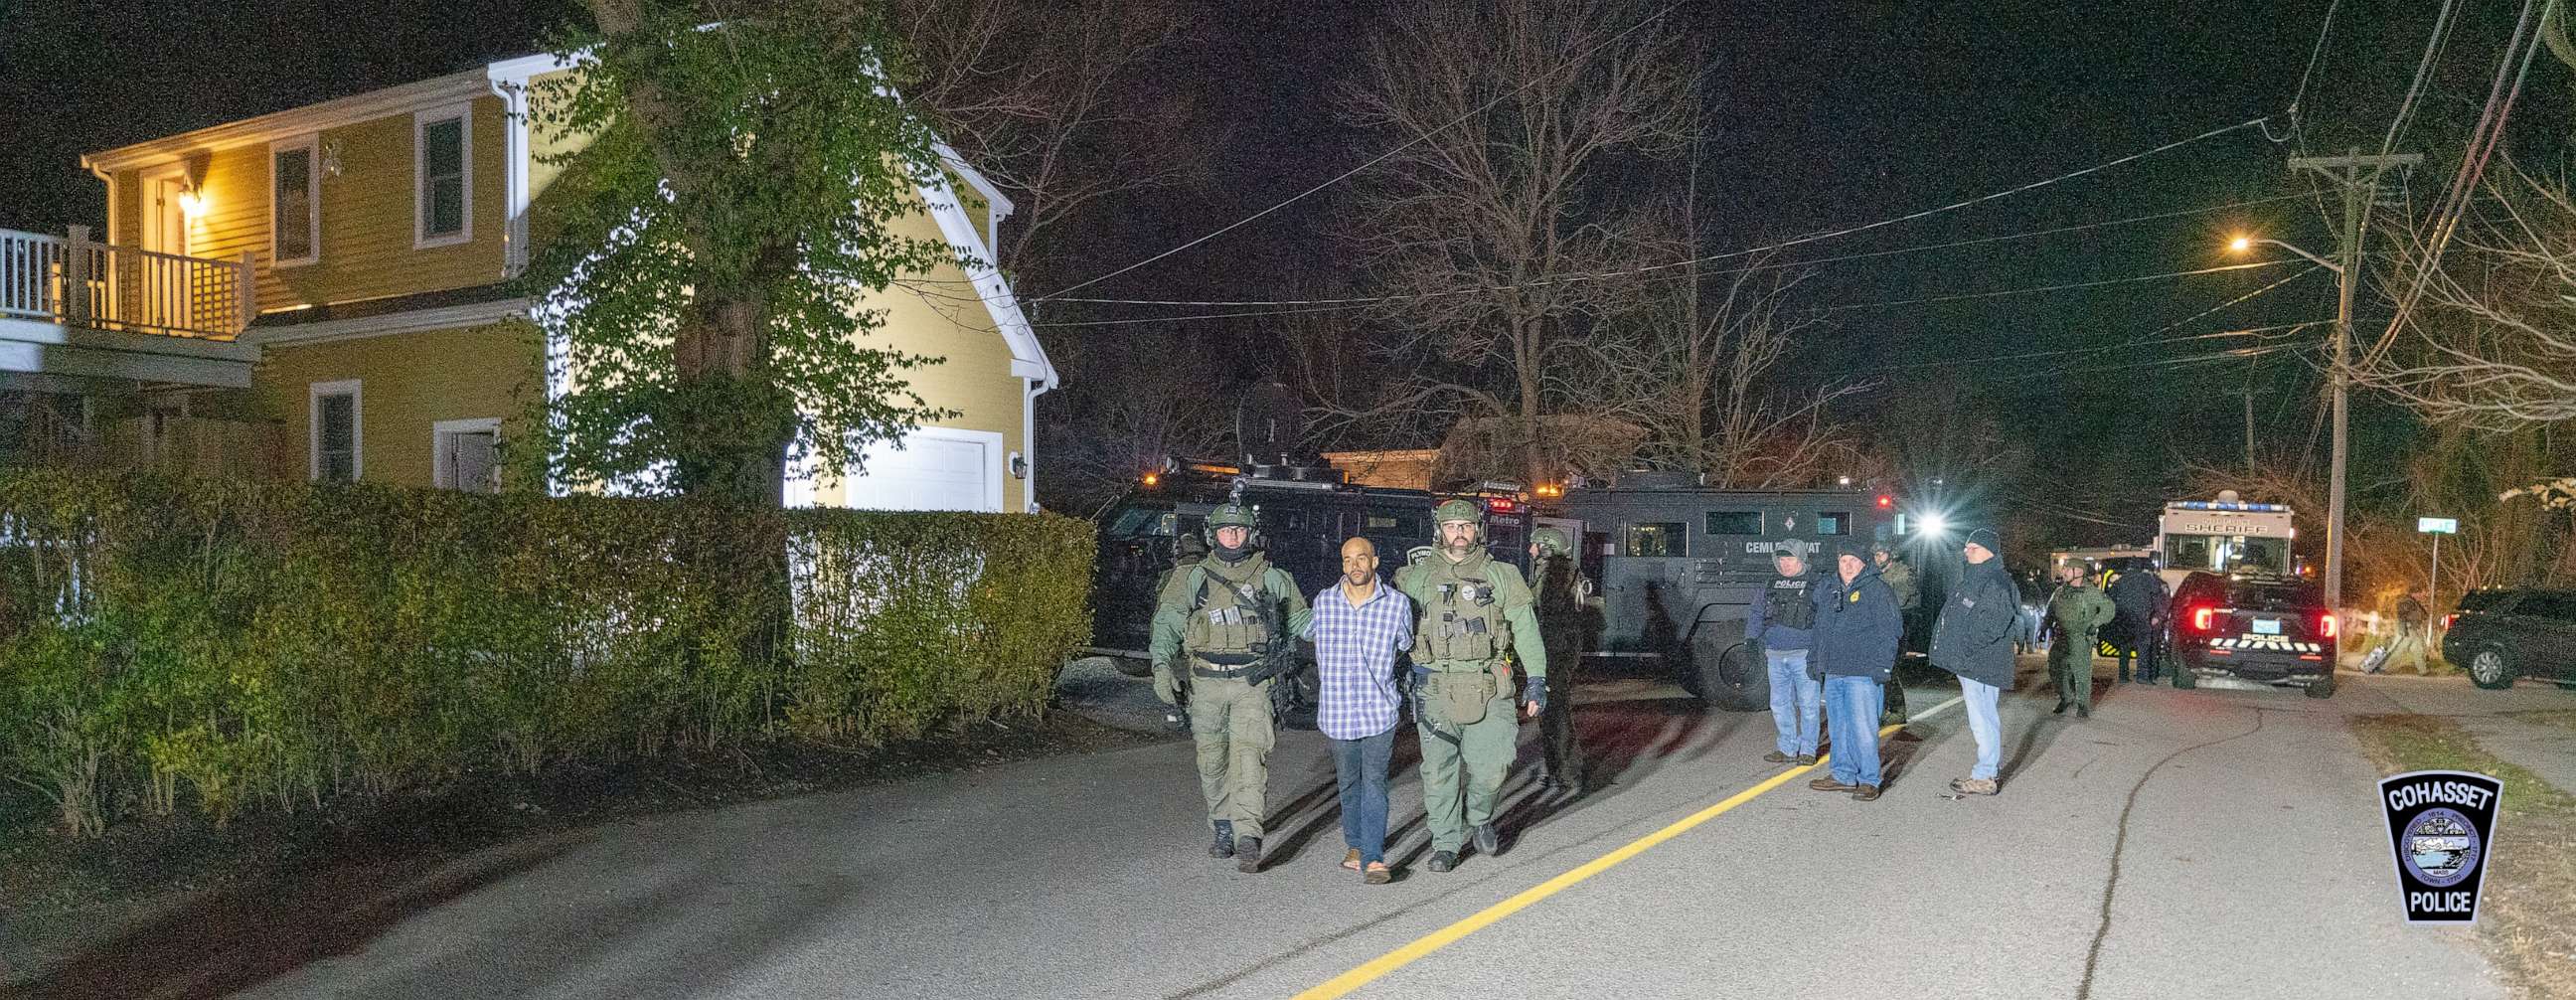 PHOTO: Police escort a man identified as Brien Buckley, 35, down a street in Cohasset, Massachusetts, in a photo supplied Sunday, Dec. 18, by the Cohasset Police Department.